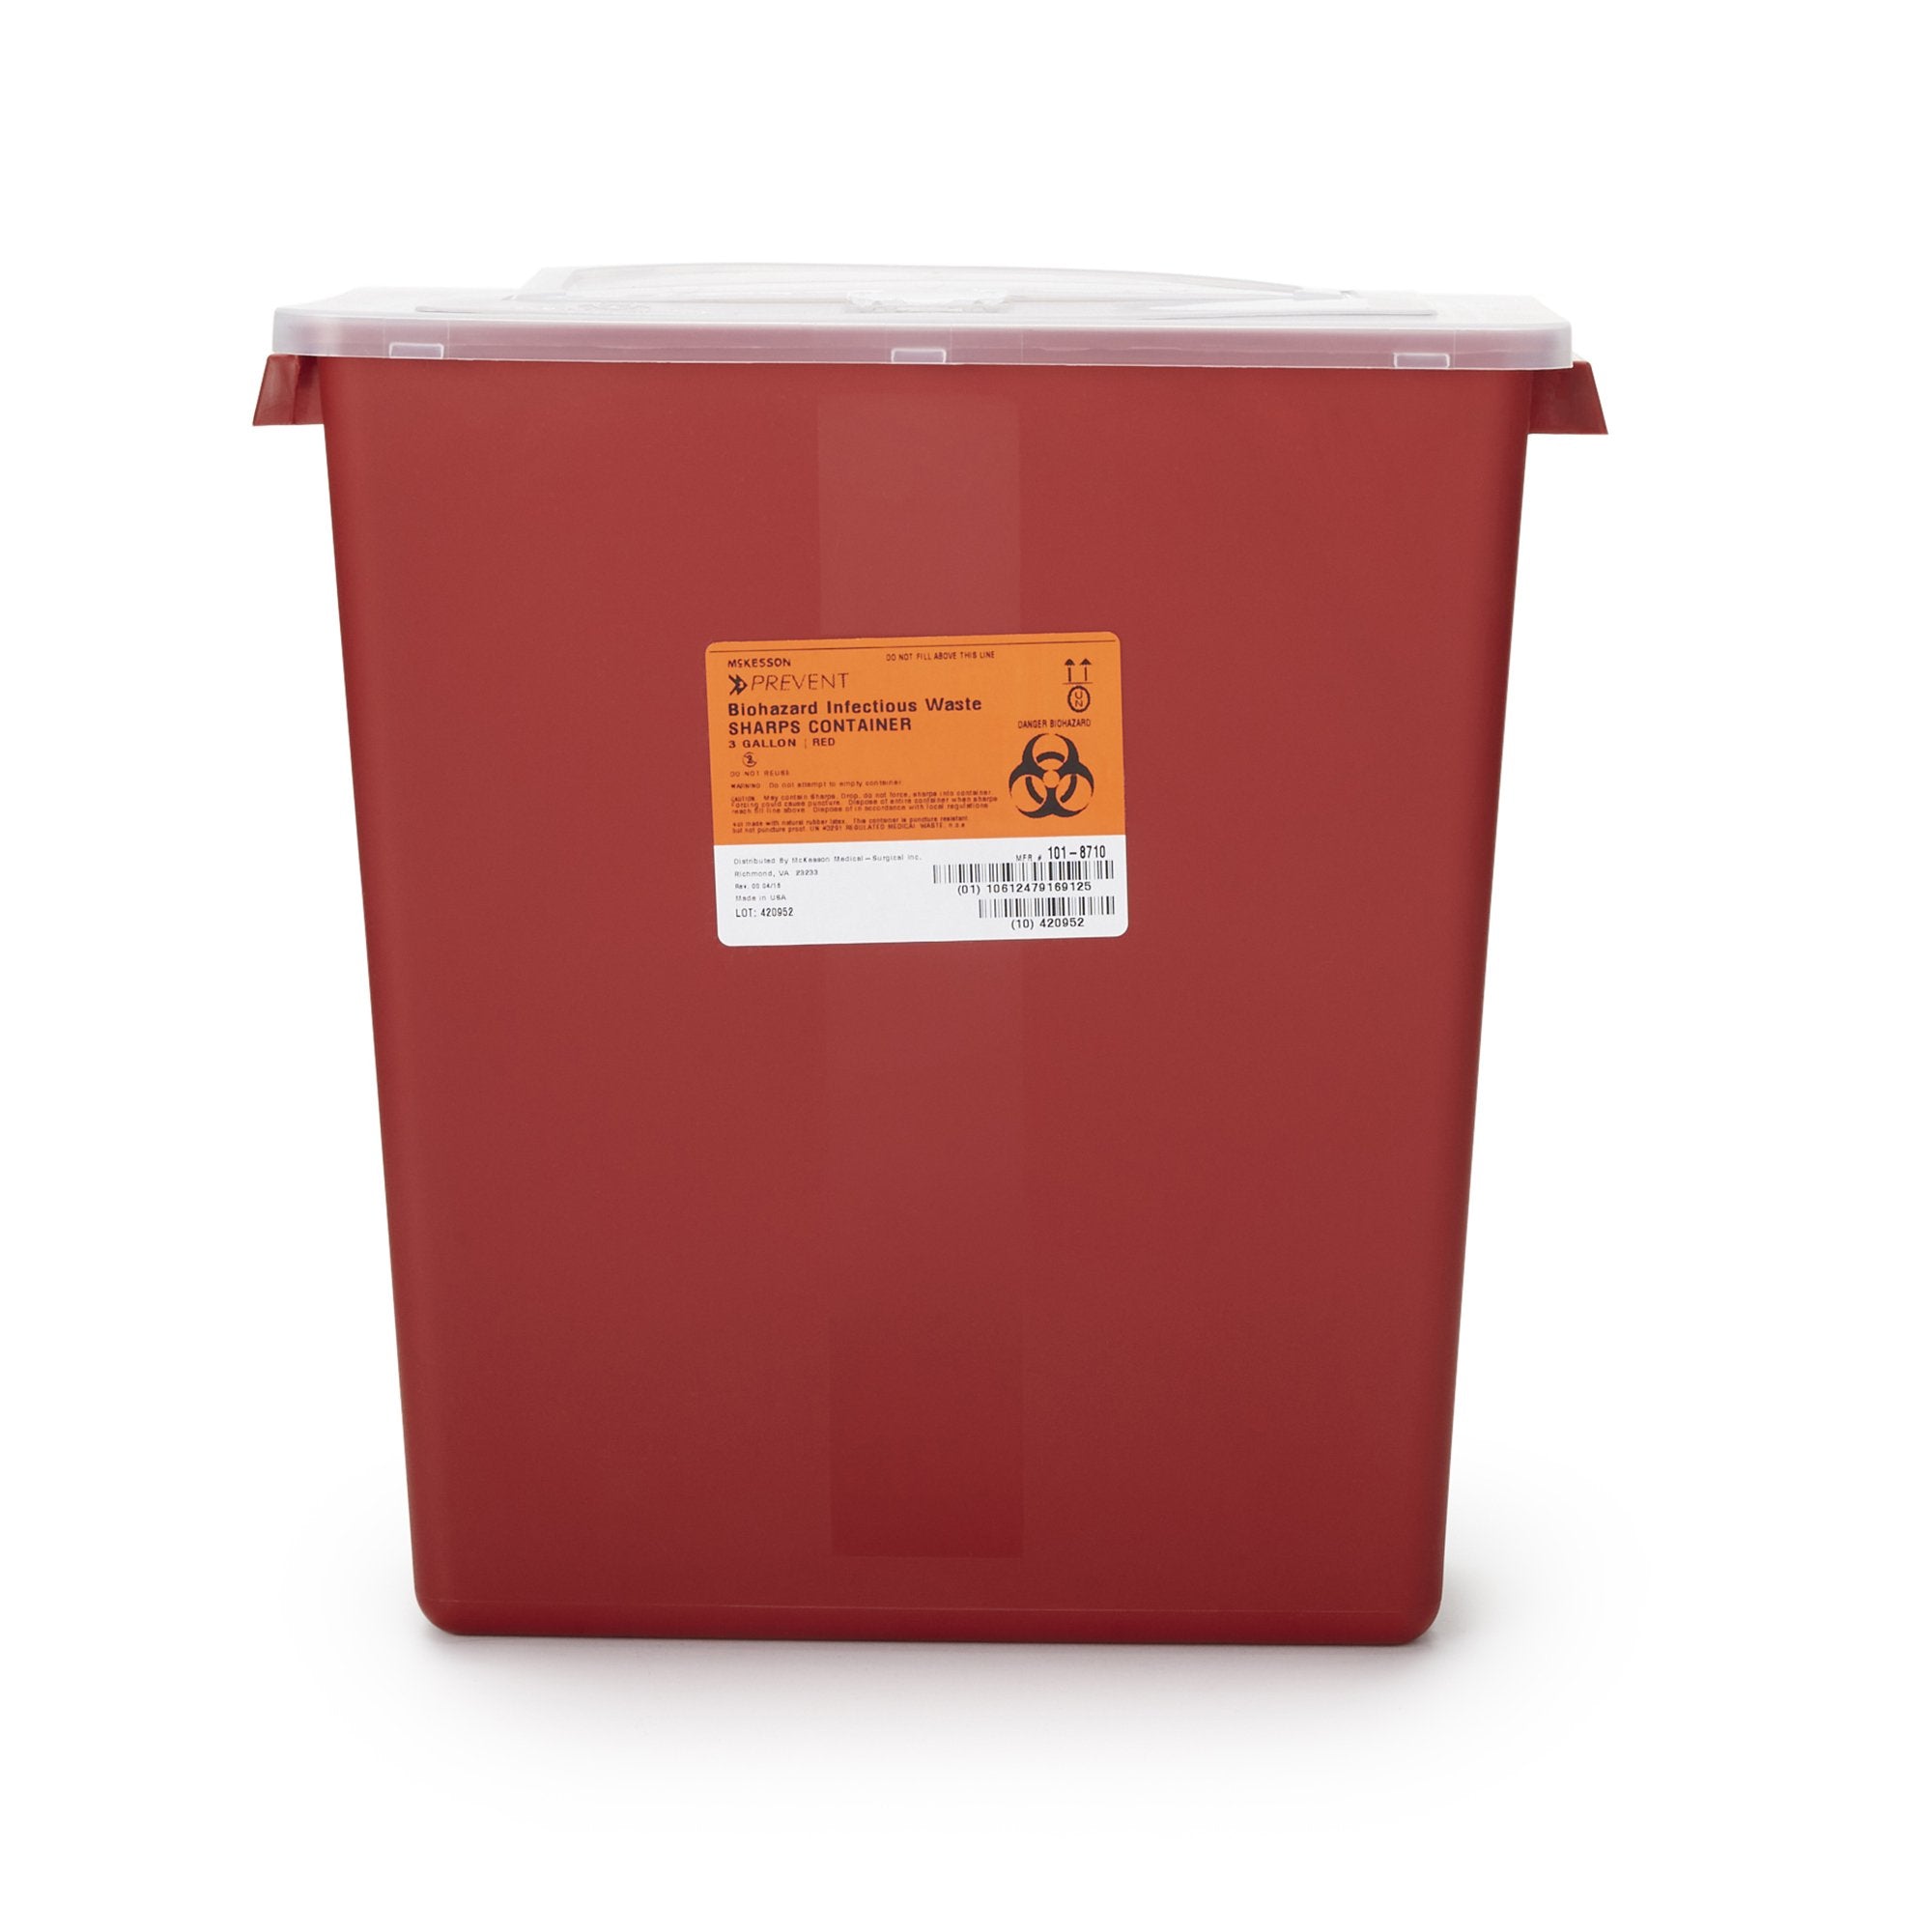 Sharps Container McKesson Red Base 13-1/2 H X 12-1/2 W X 6 D Inch Horizontal Entry 3 Gallon